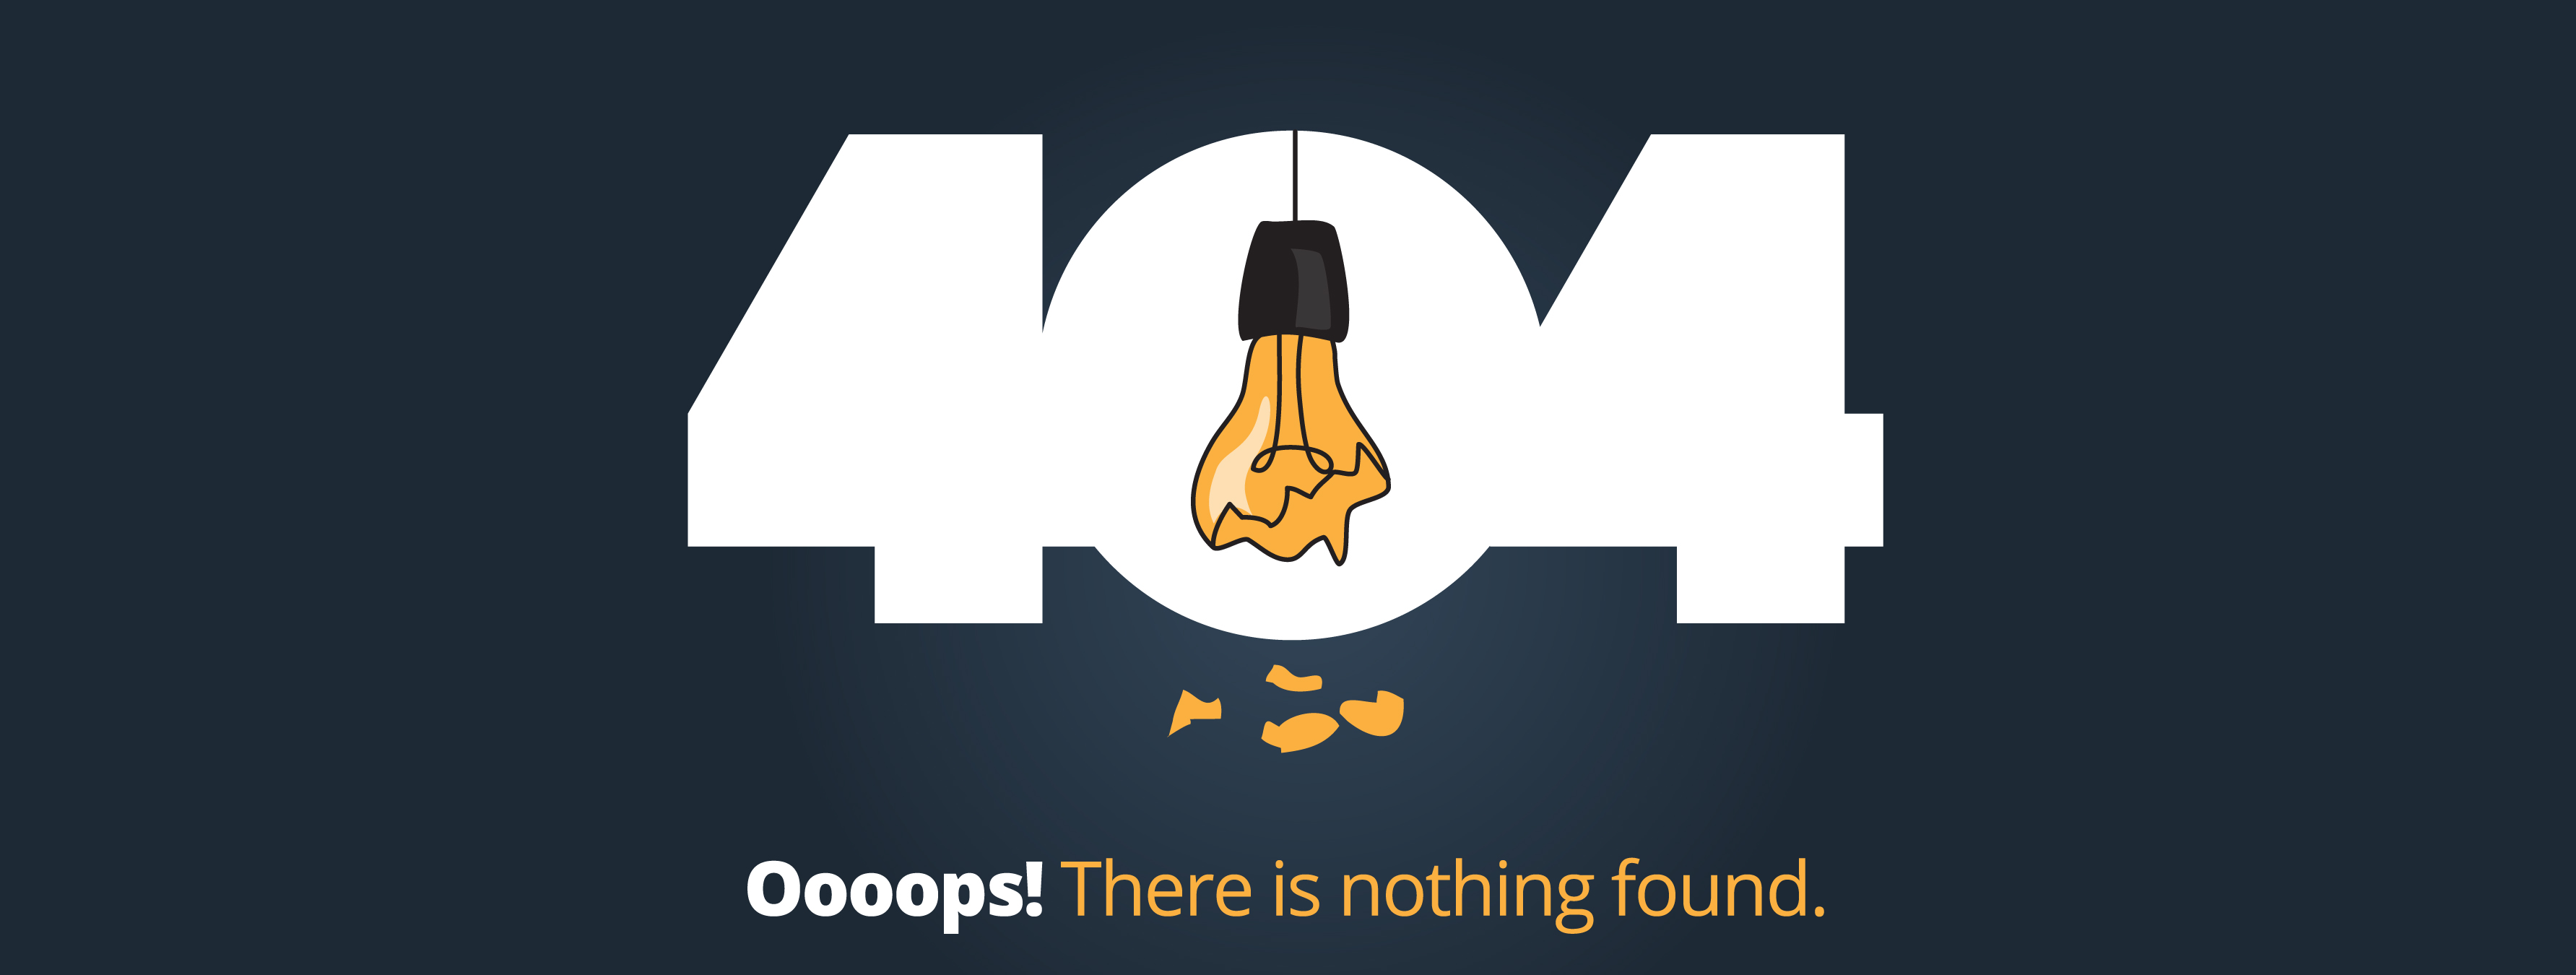 404. Broken lightbulb. Oooops! There is nothing found.